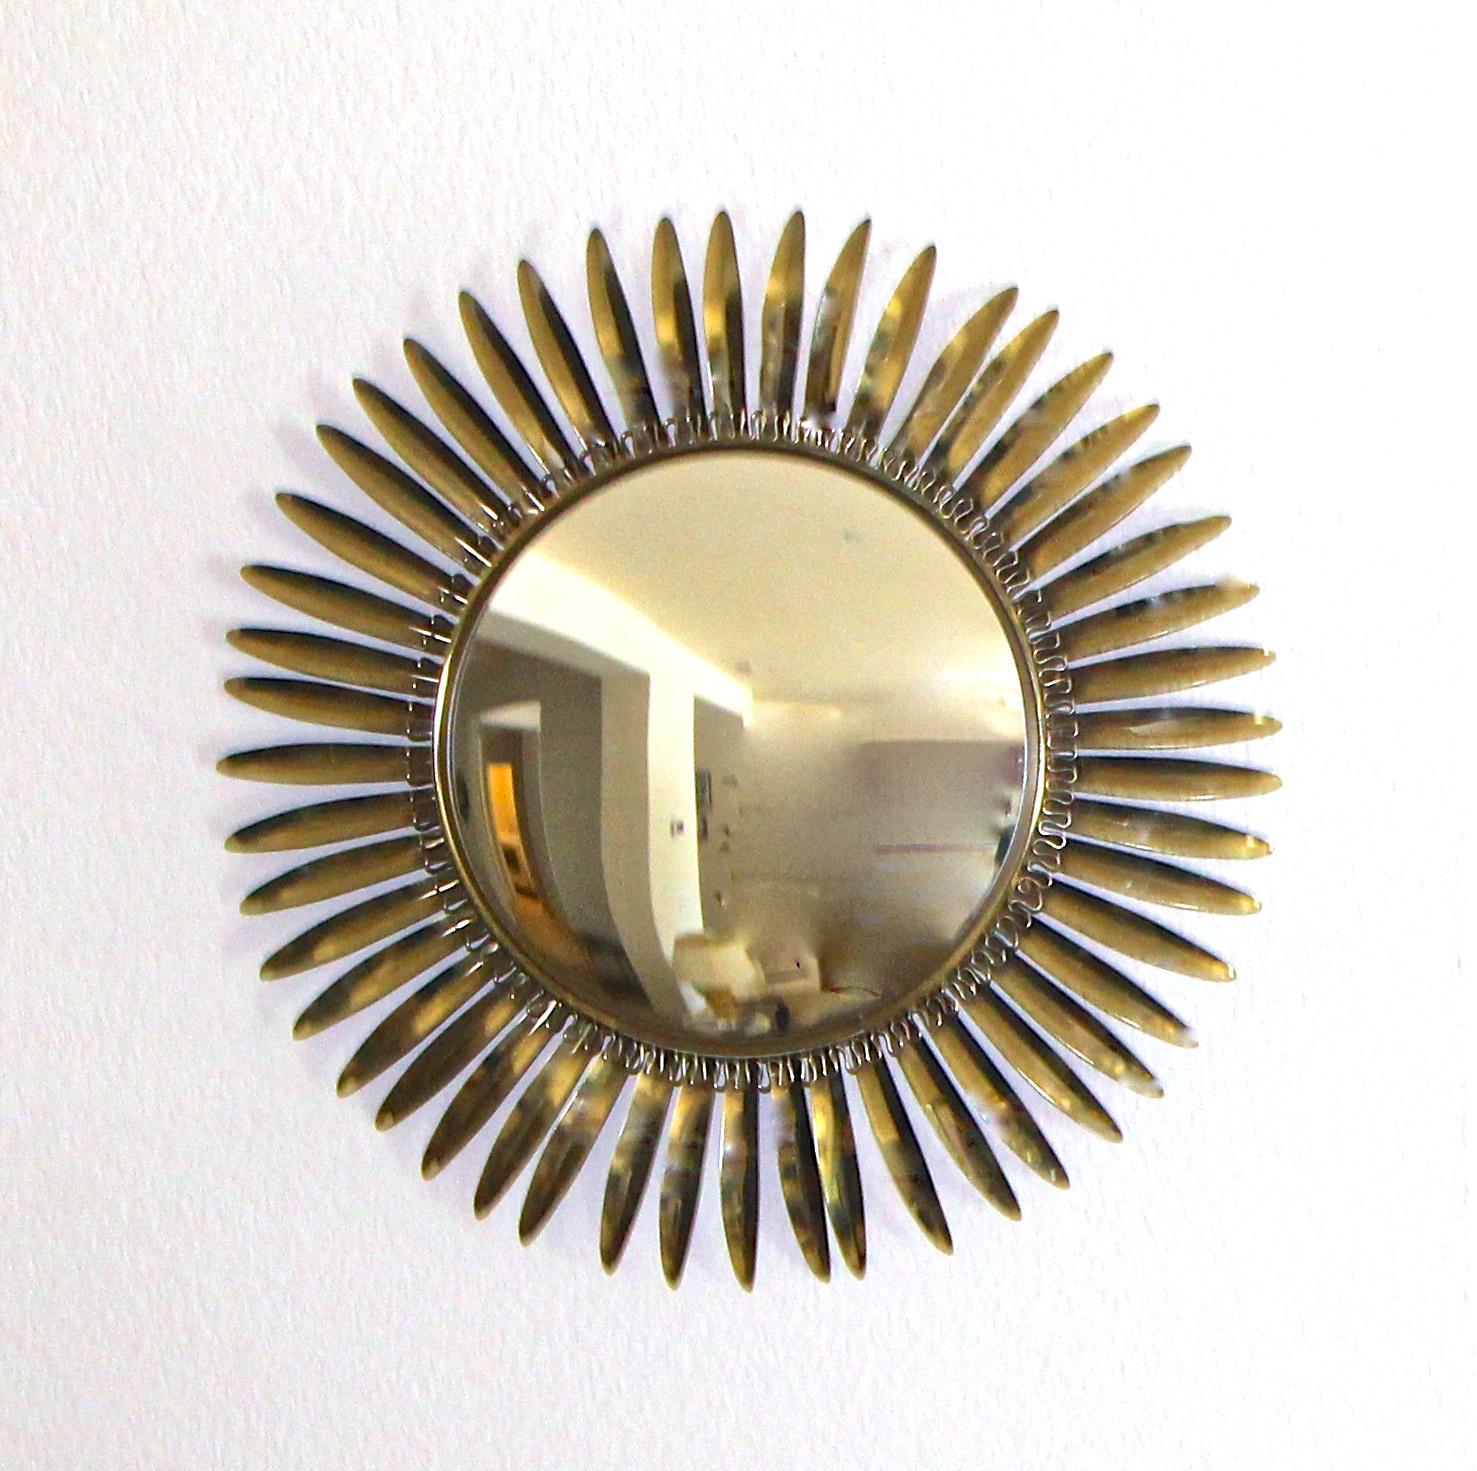 French soleil or sunburst style convex wall mirror with a undulating wire detail and 